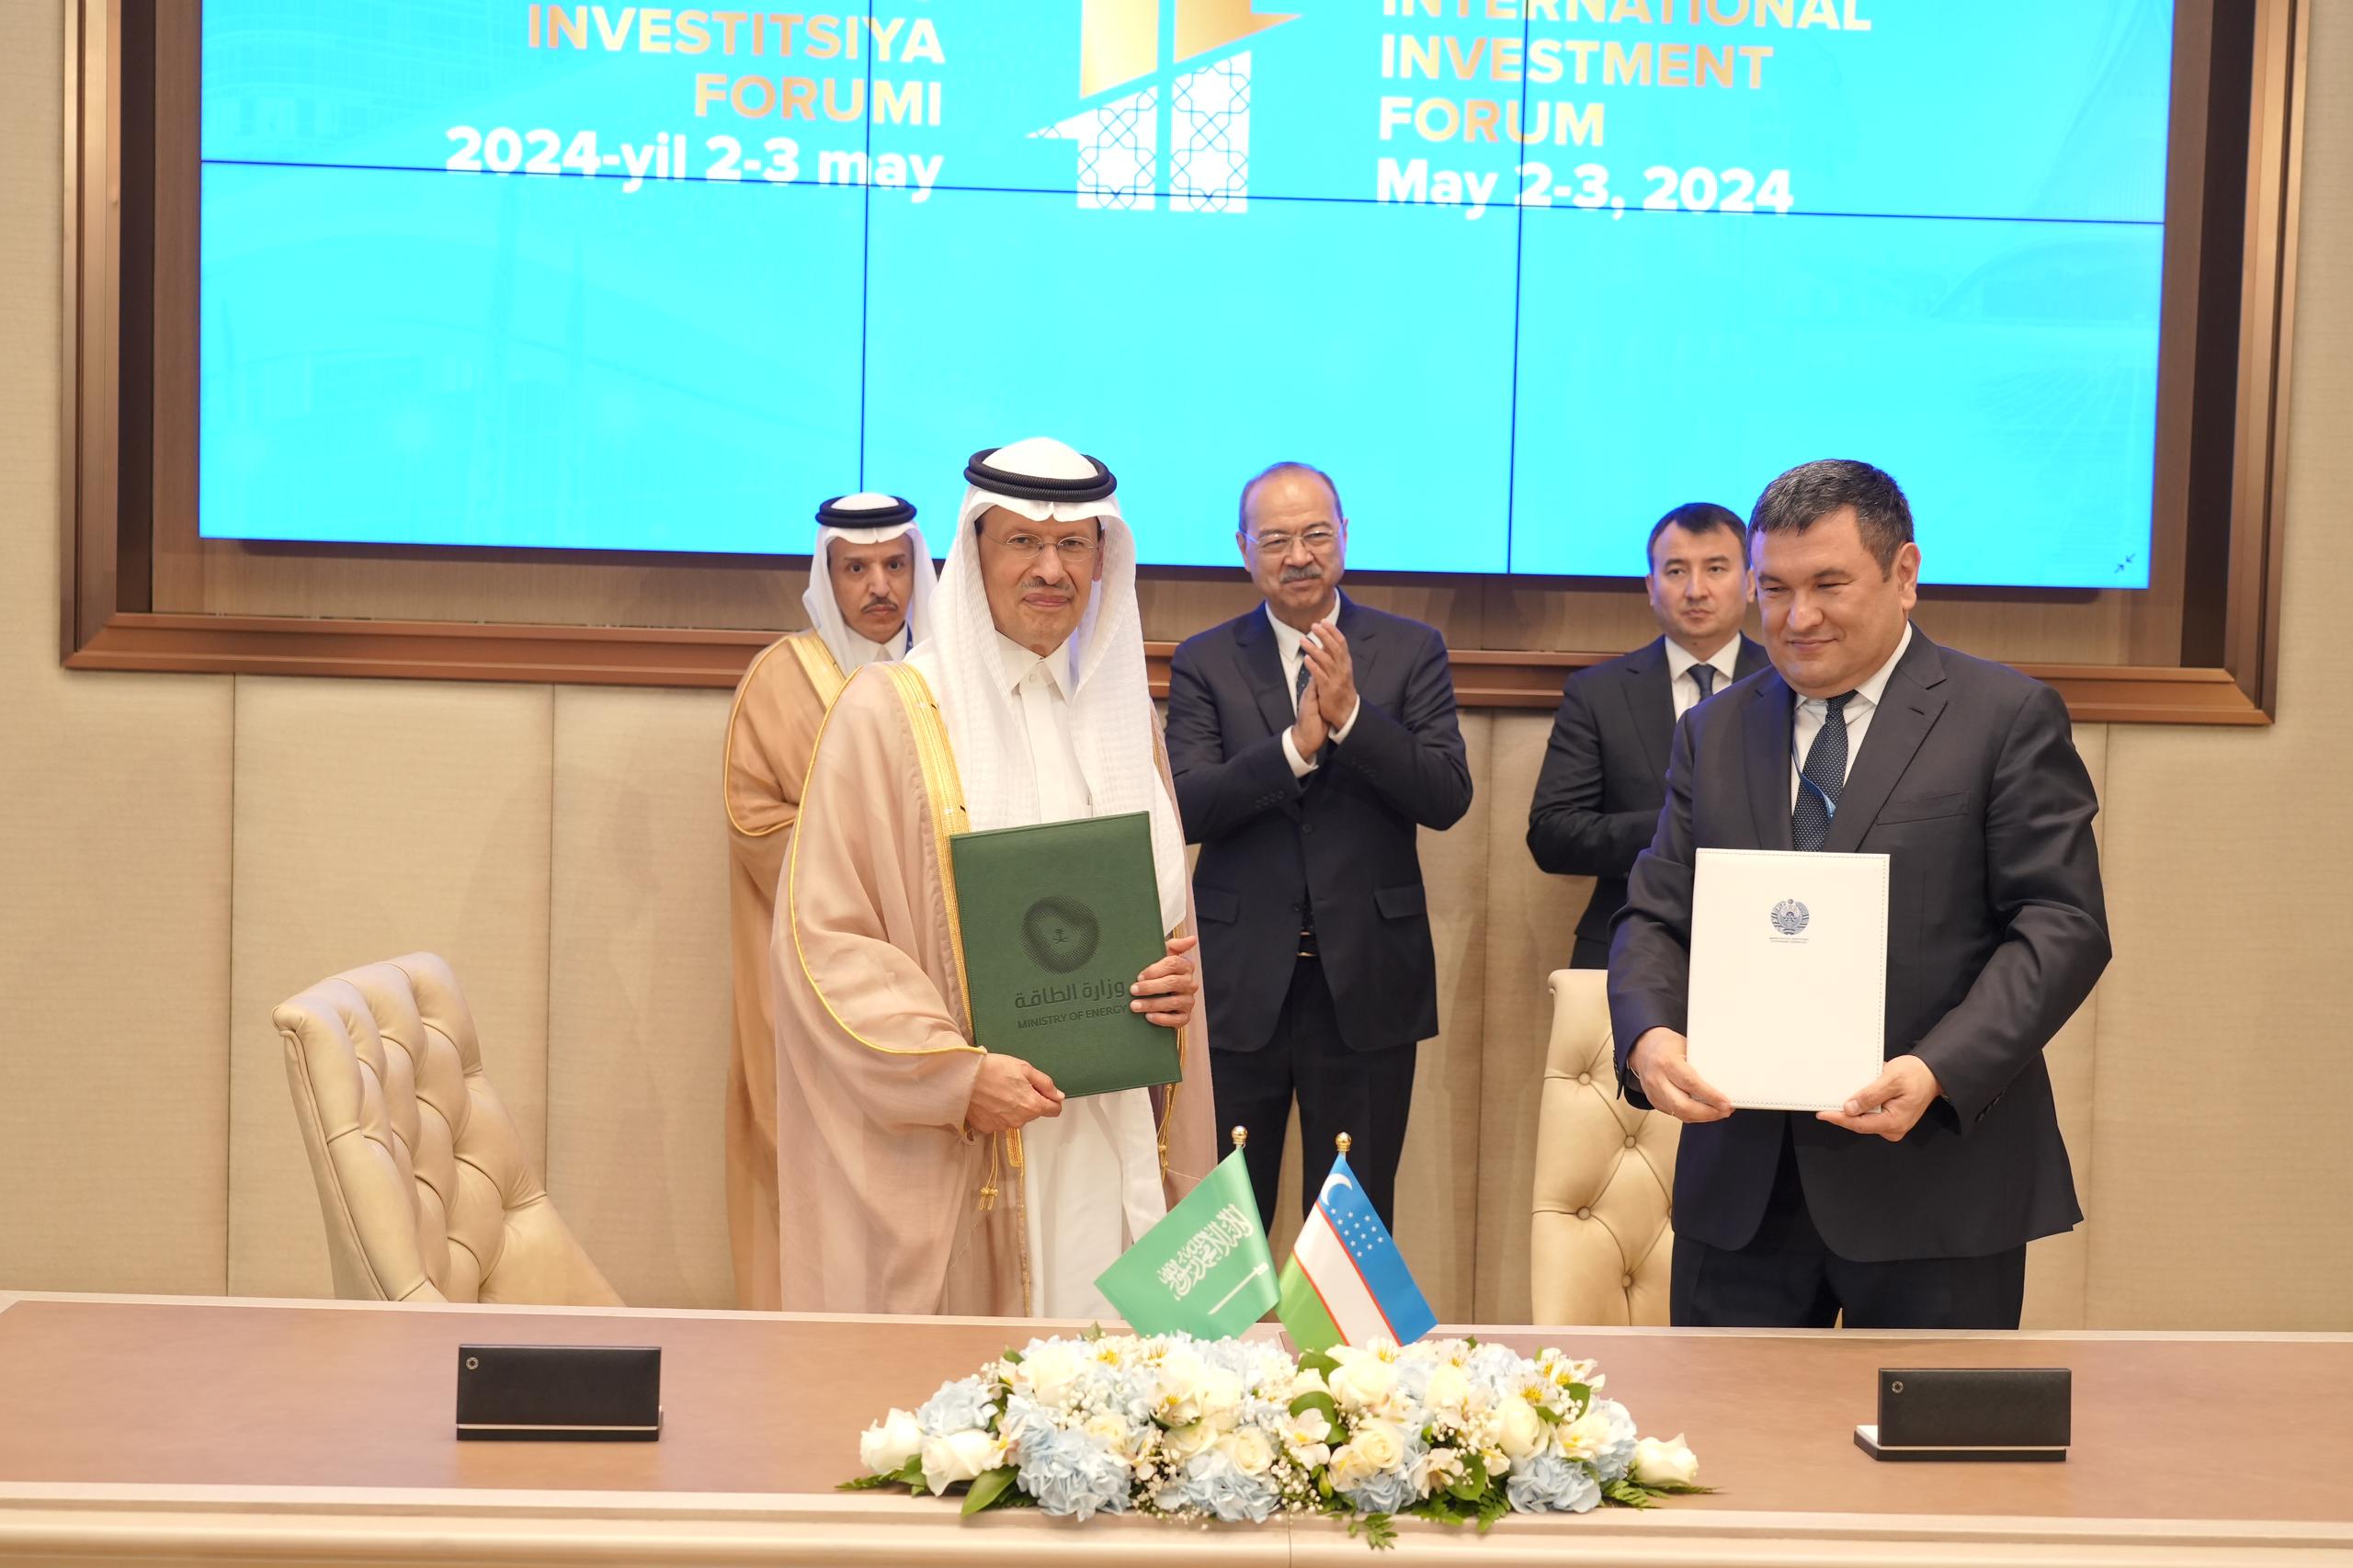 Joint Statement on Energy Cooperation between the Kingdom of Saudi Arabia and the Republic of Uzbekistan